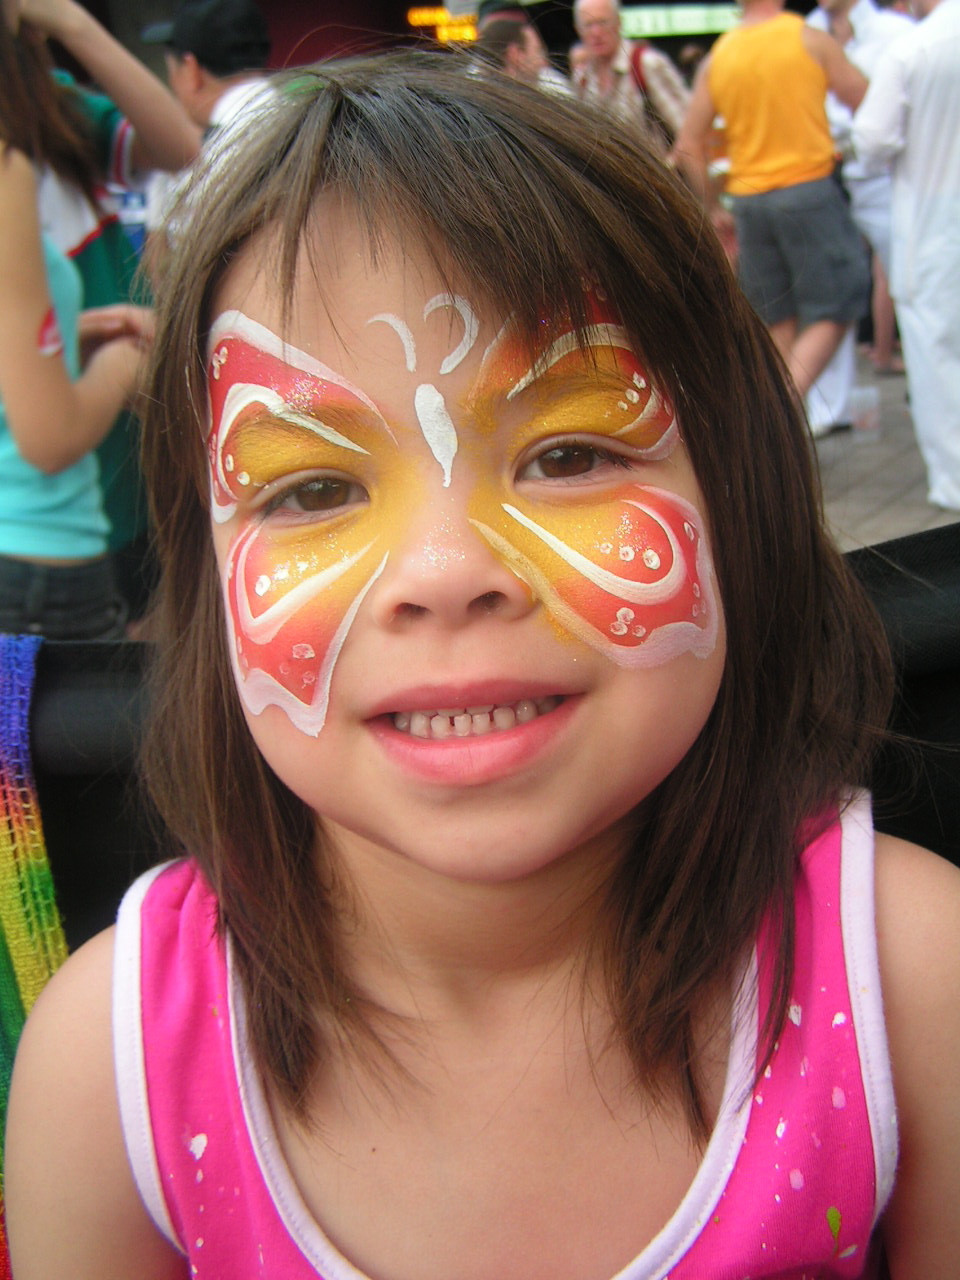 Birthday Party Face Painting
 Body Painting Show Face Painting Party Birthday Ideas